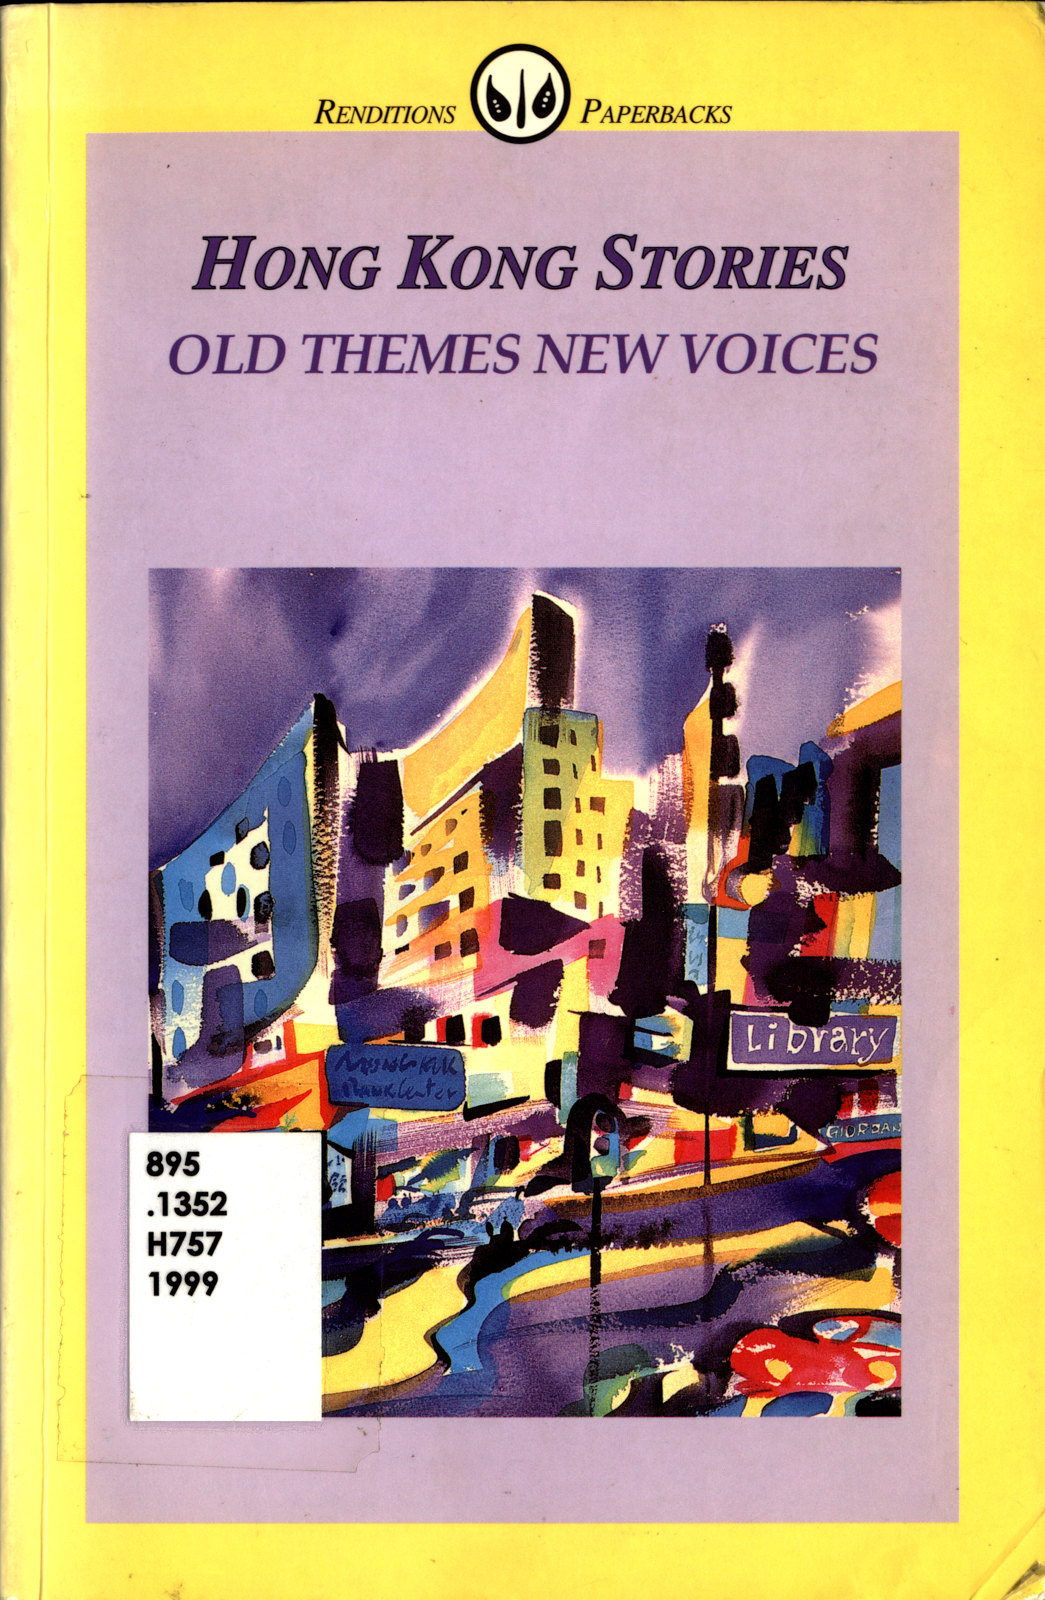 Hong Kong Stories: Old Themes New Voices